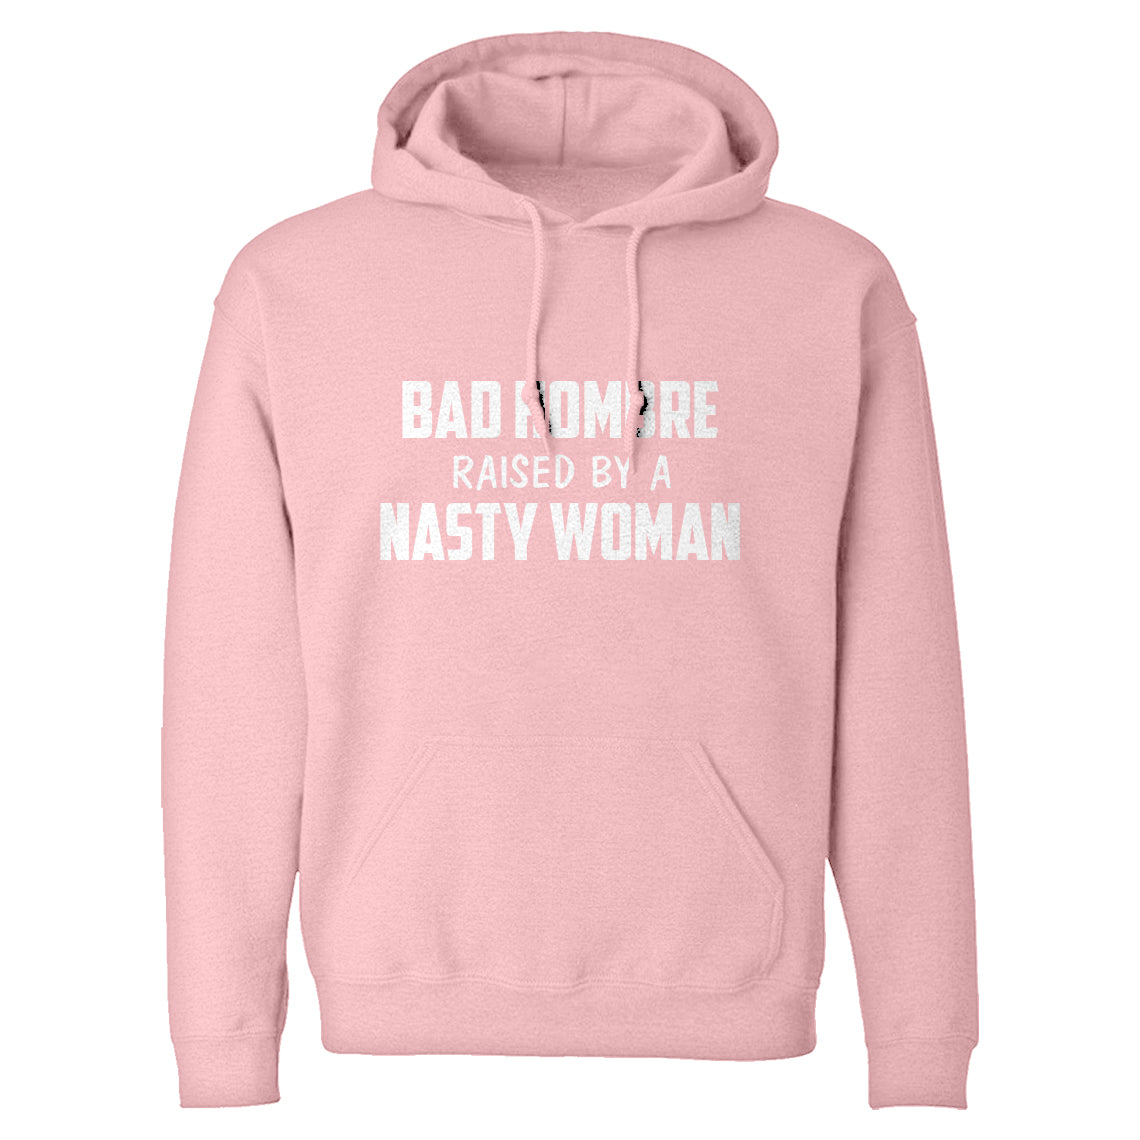 Hoodie Bad Hombre Raised By A Nasty Woman Unisex Adult Hoodie Indica Plateau 1090